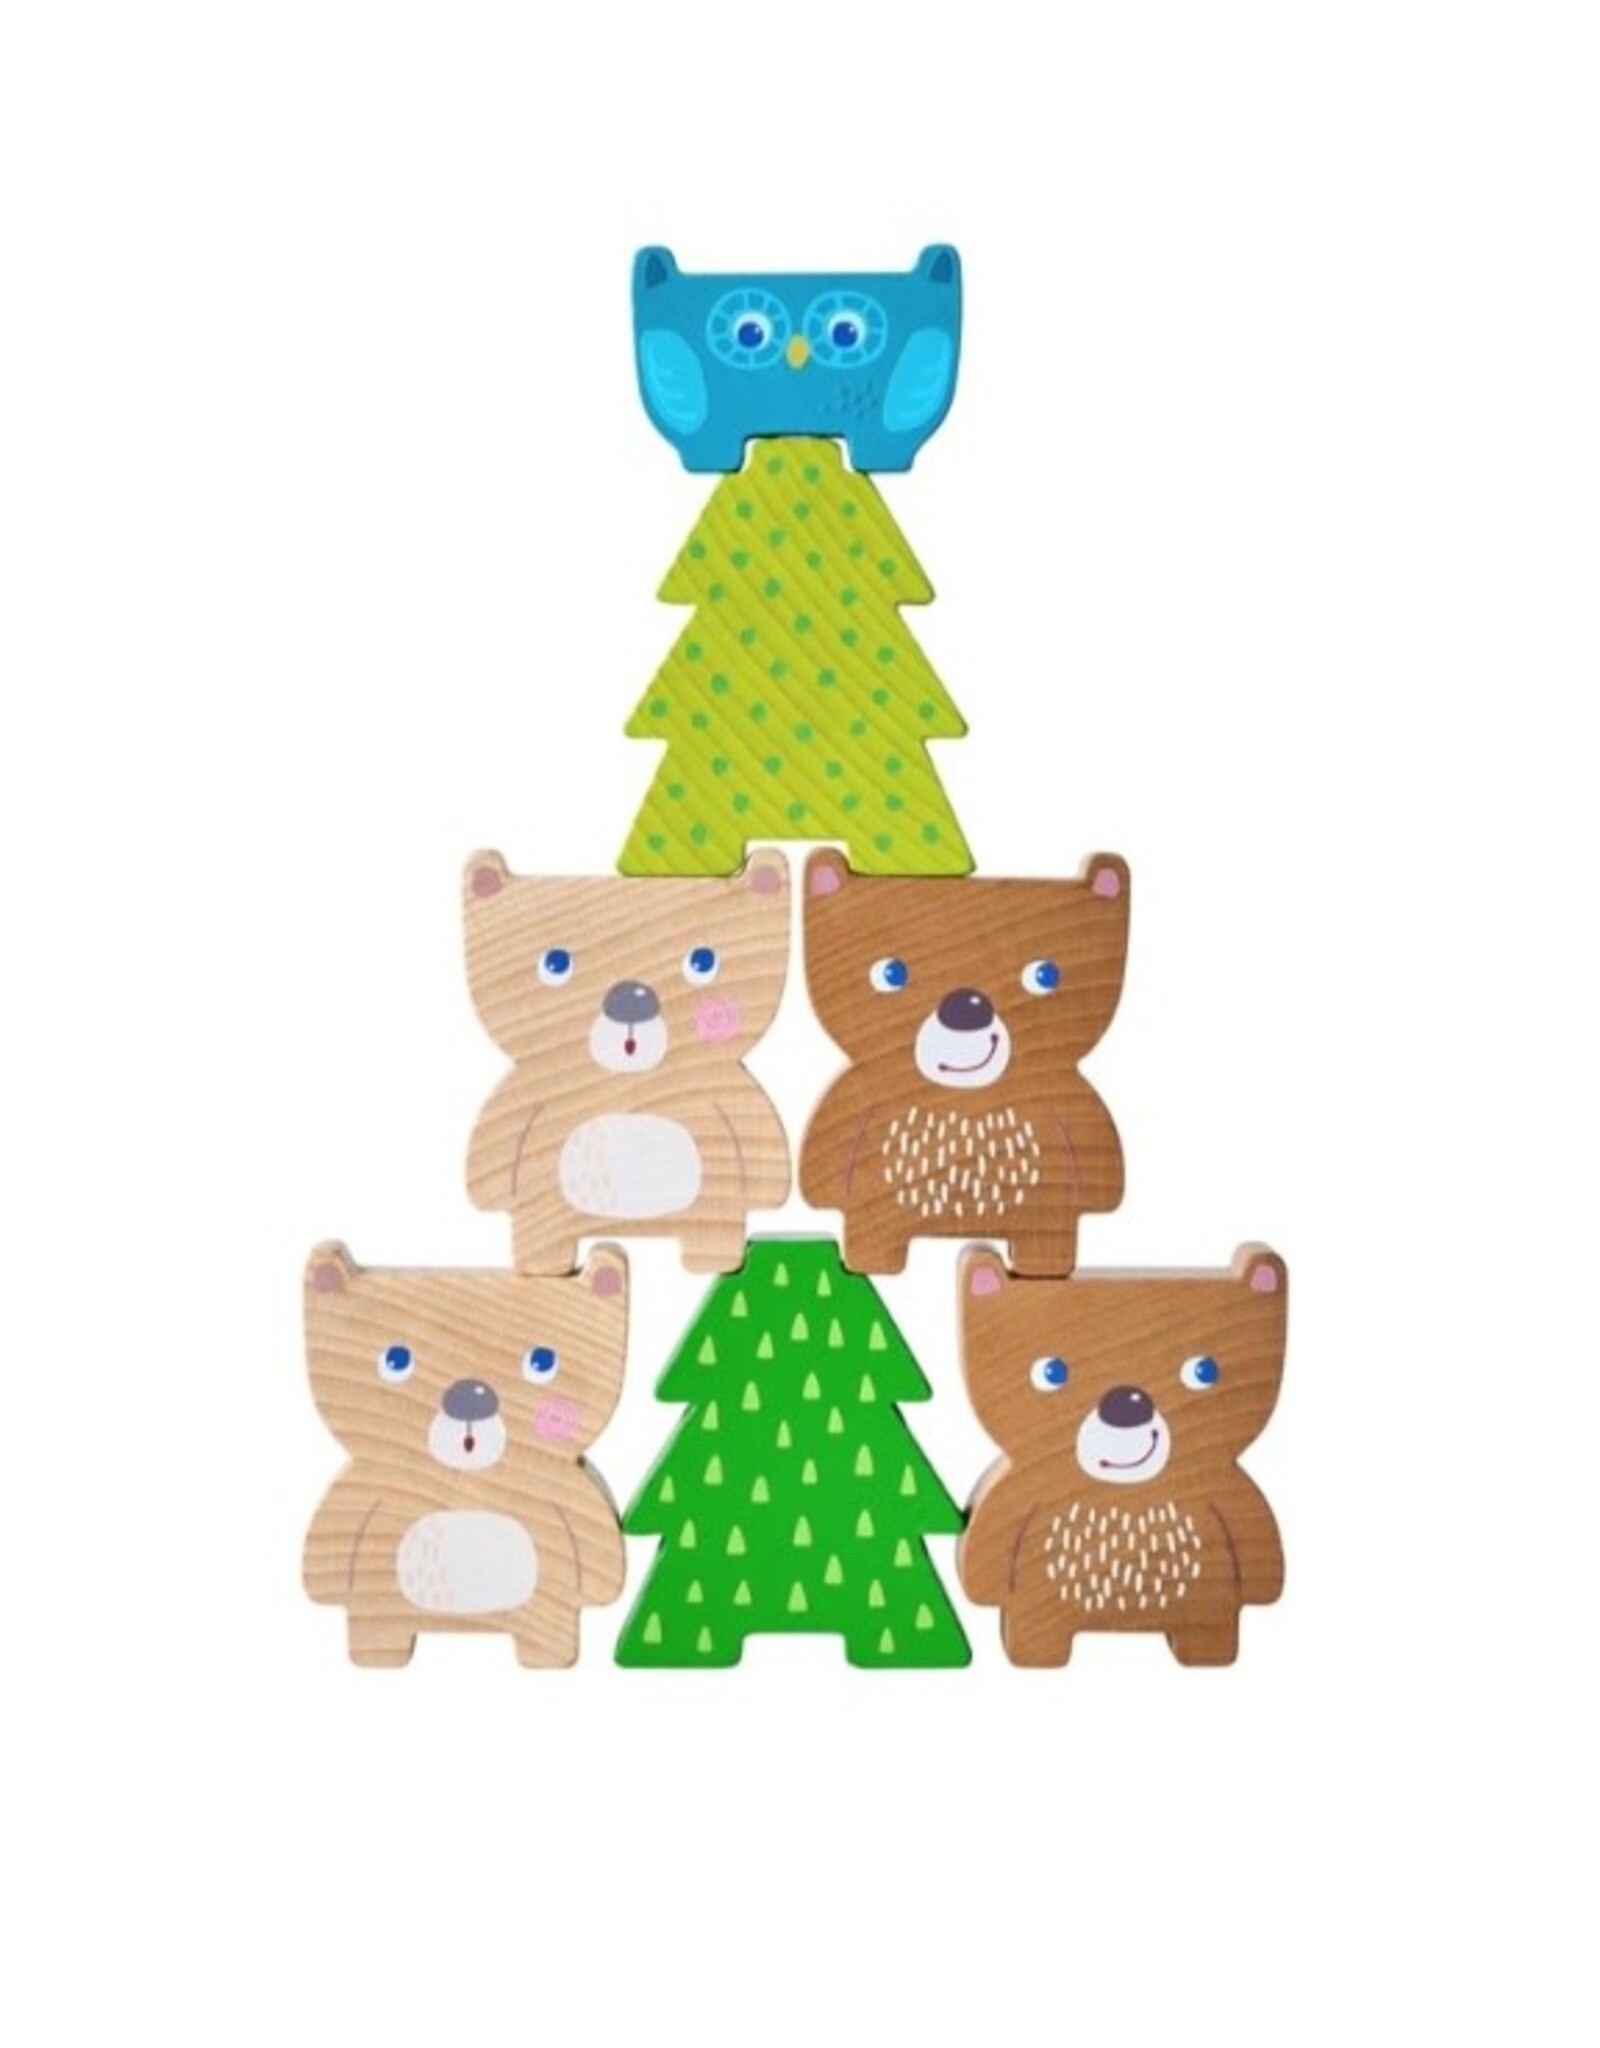 Haba Forest Friends Stacking Toy